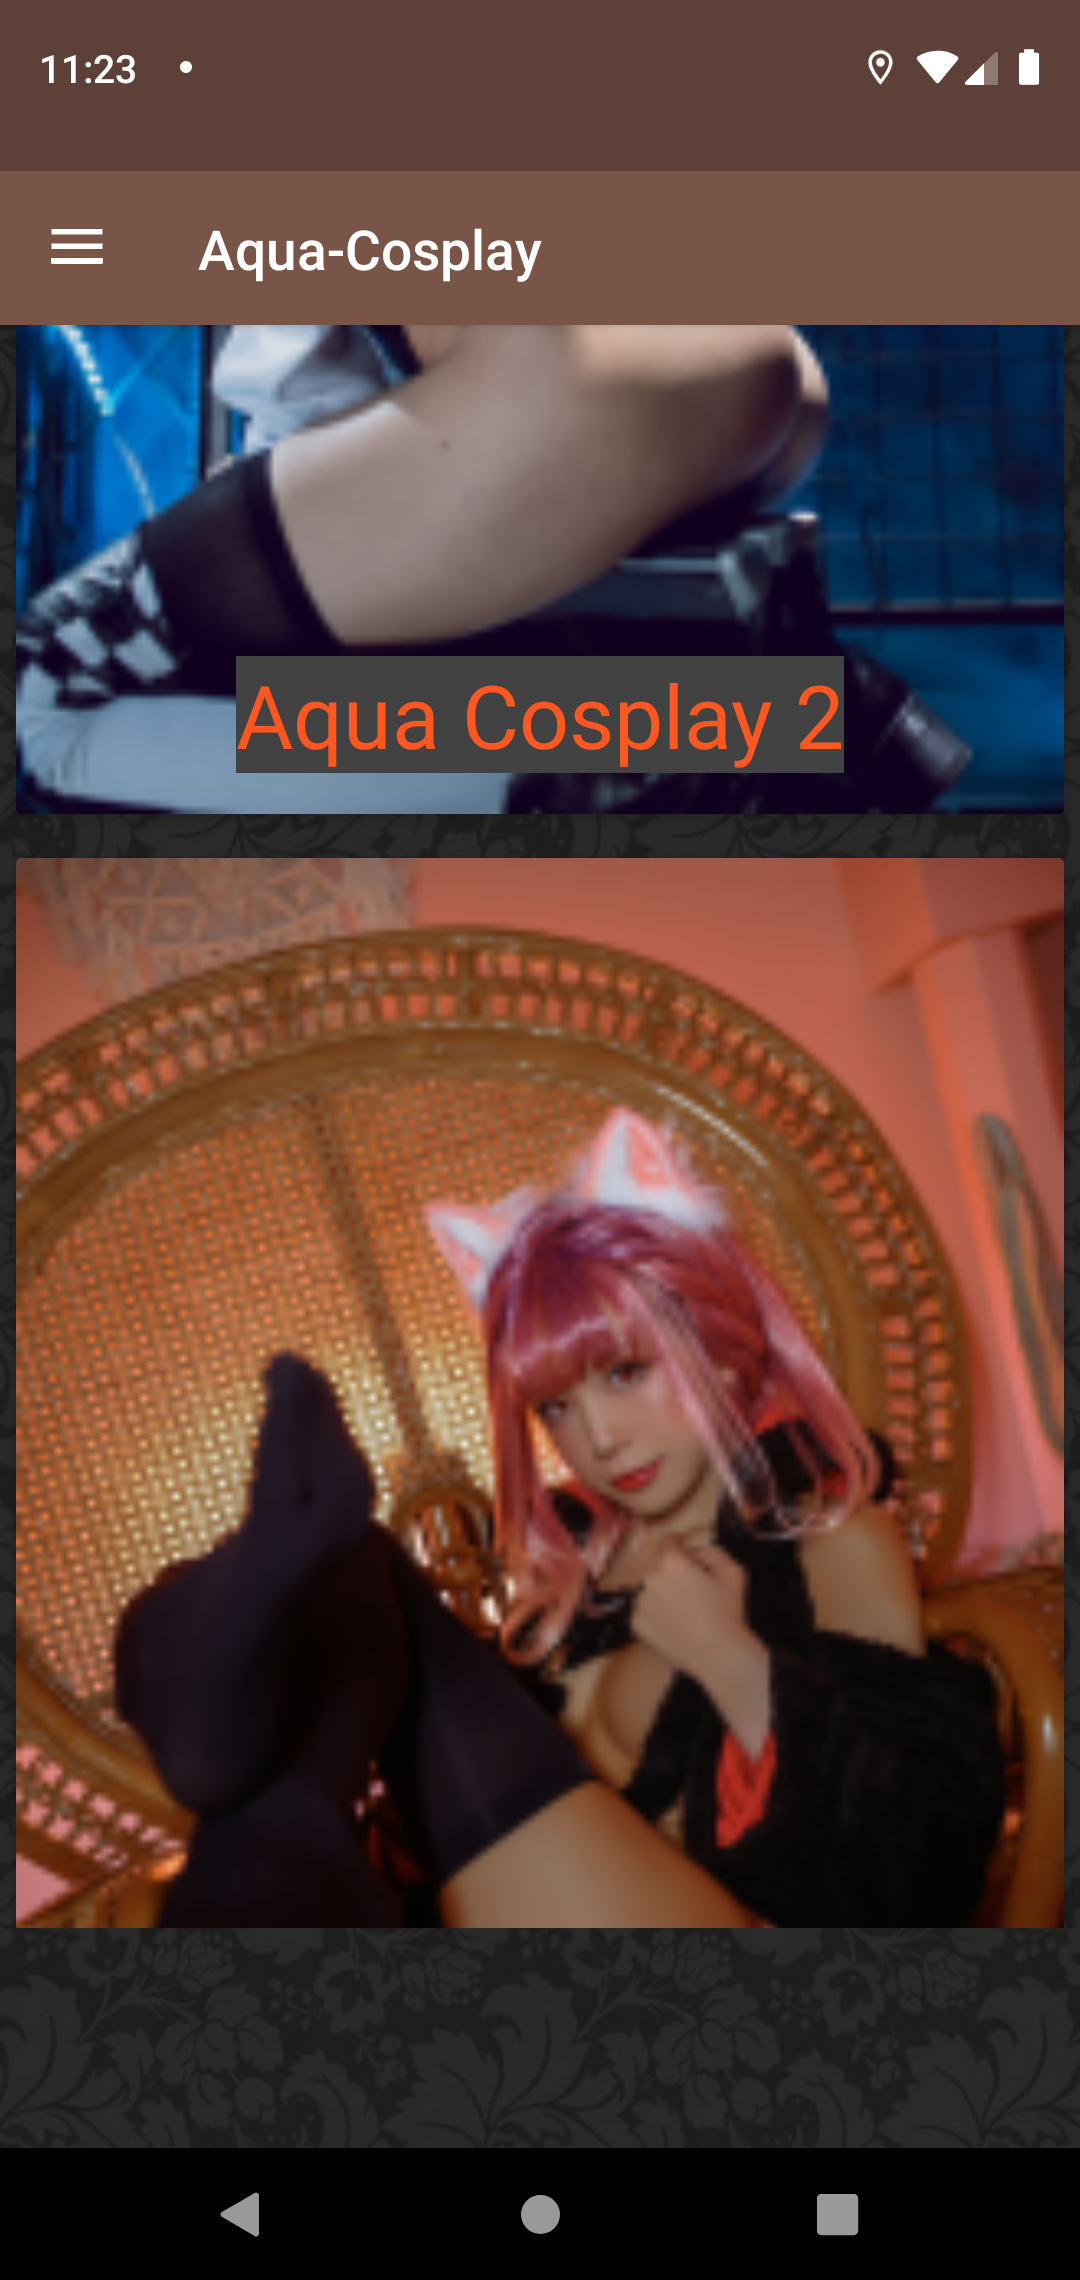 Aqua Cosplay search,henati,photos,download,hentai,collection,porn,pics,star,app,pictures,picture,hantai,cosplay,mobile,pic,mature,wallpapers,gallery,anime,galleries,apps